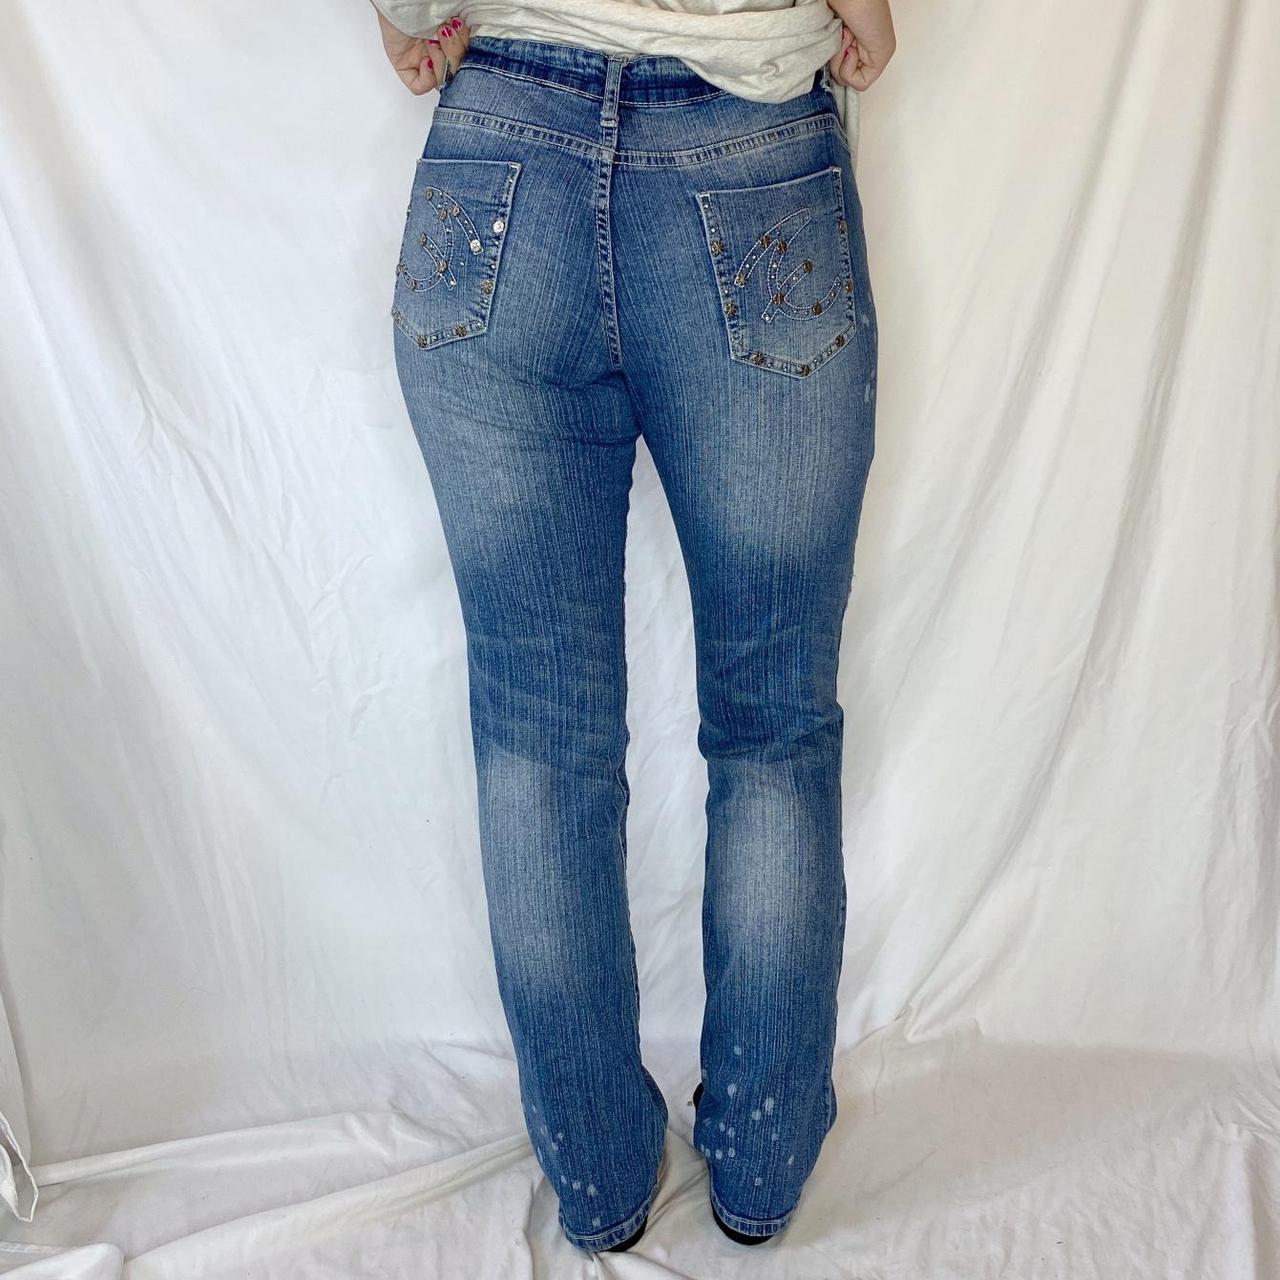 Product Image 3 - cut out low rise jeans

these